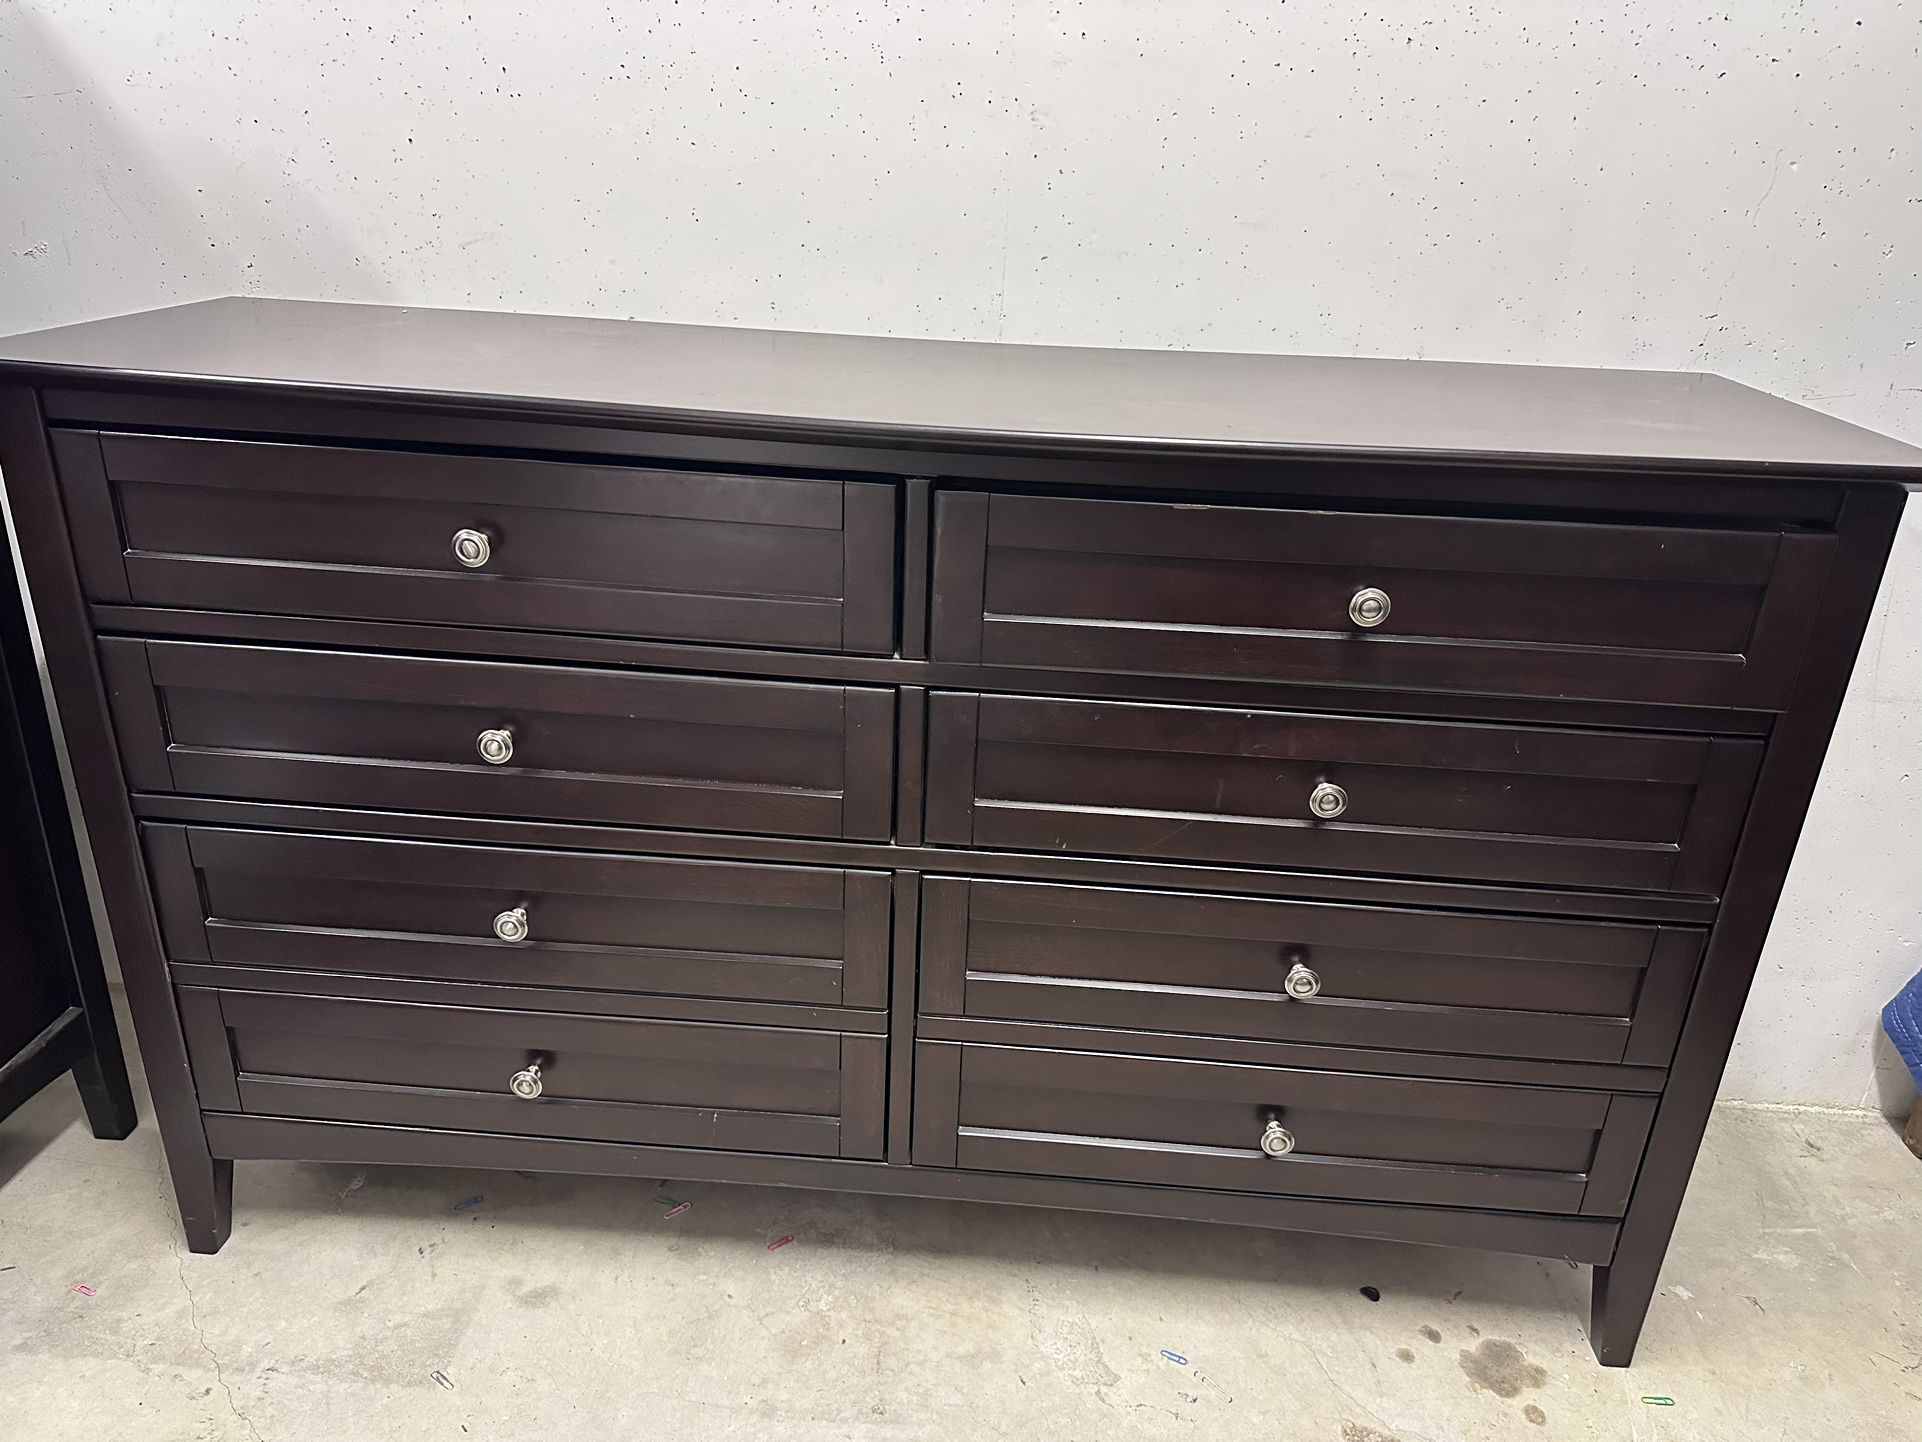 Bedroom Double Dresser - Matching Dresser, Mirror and End Tables Available